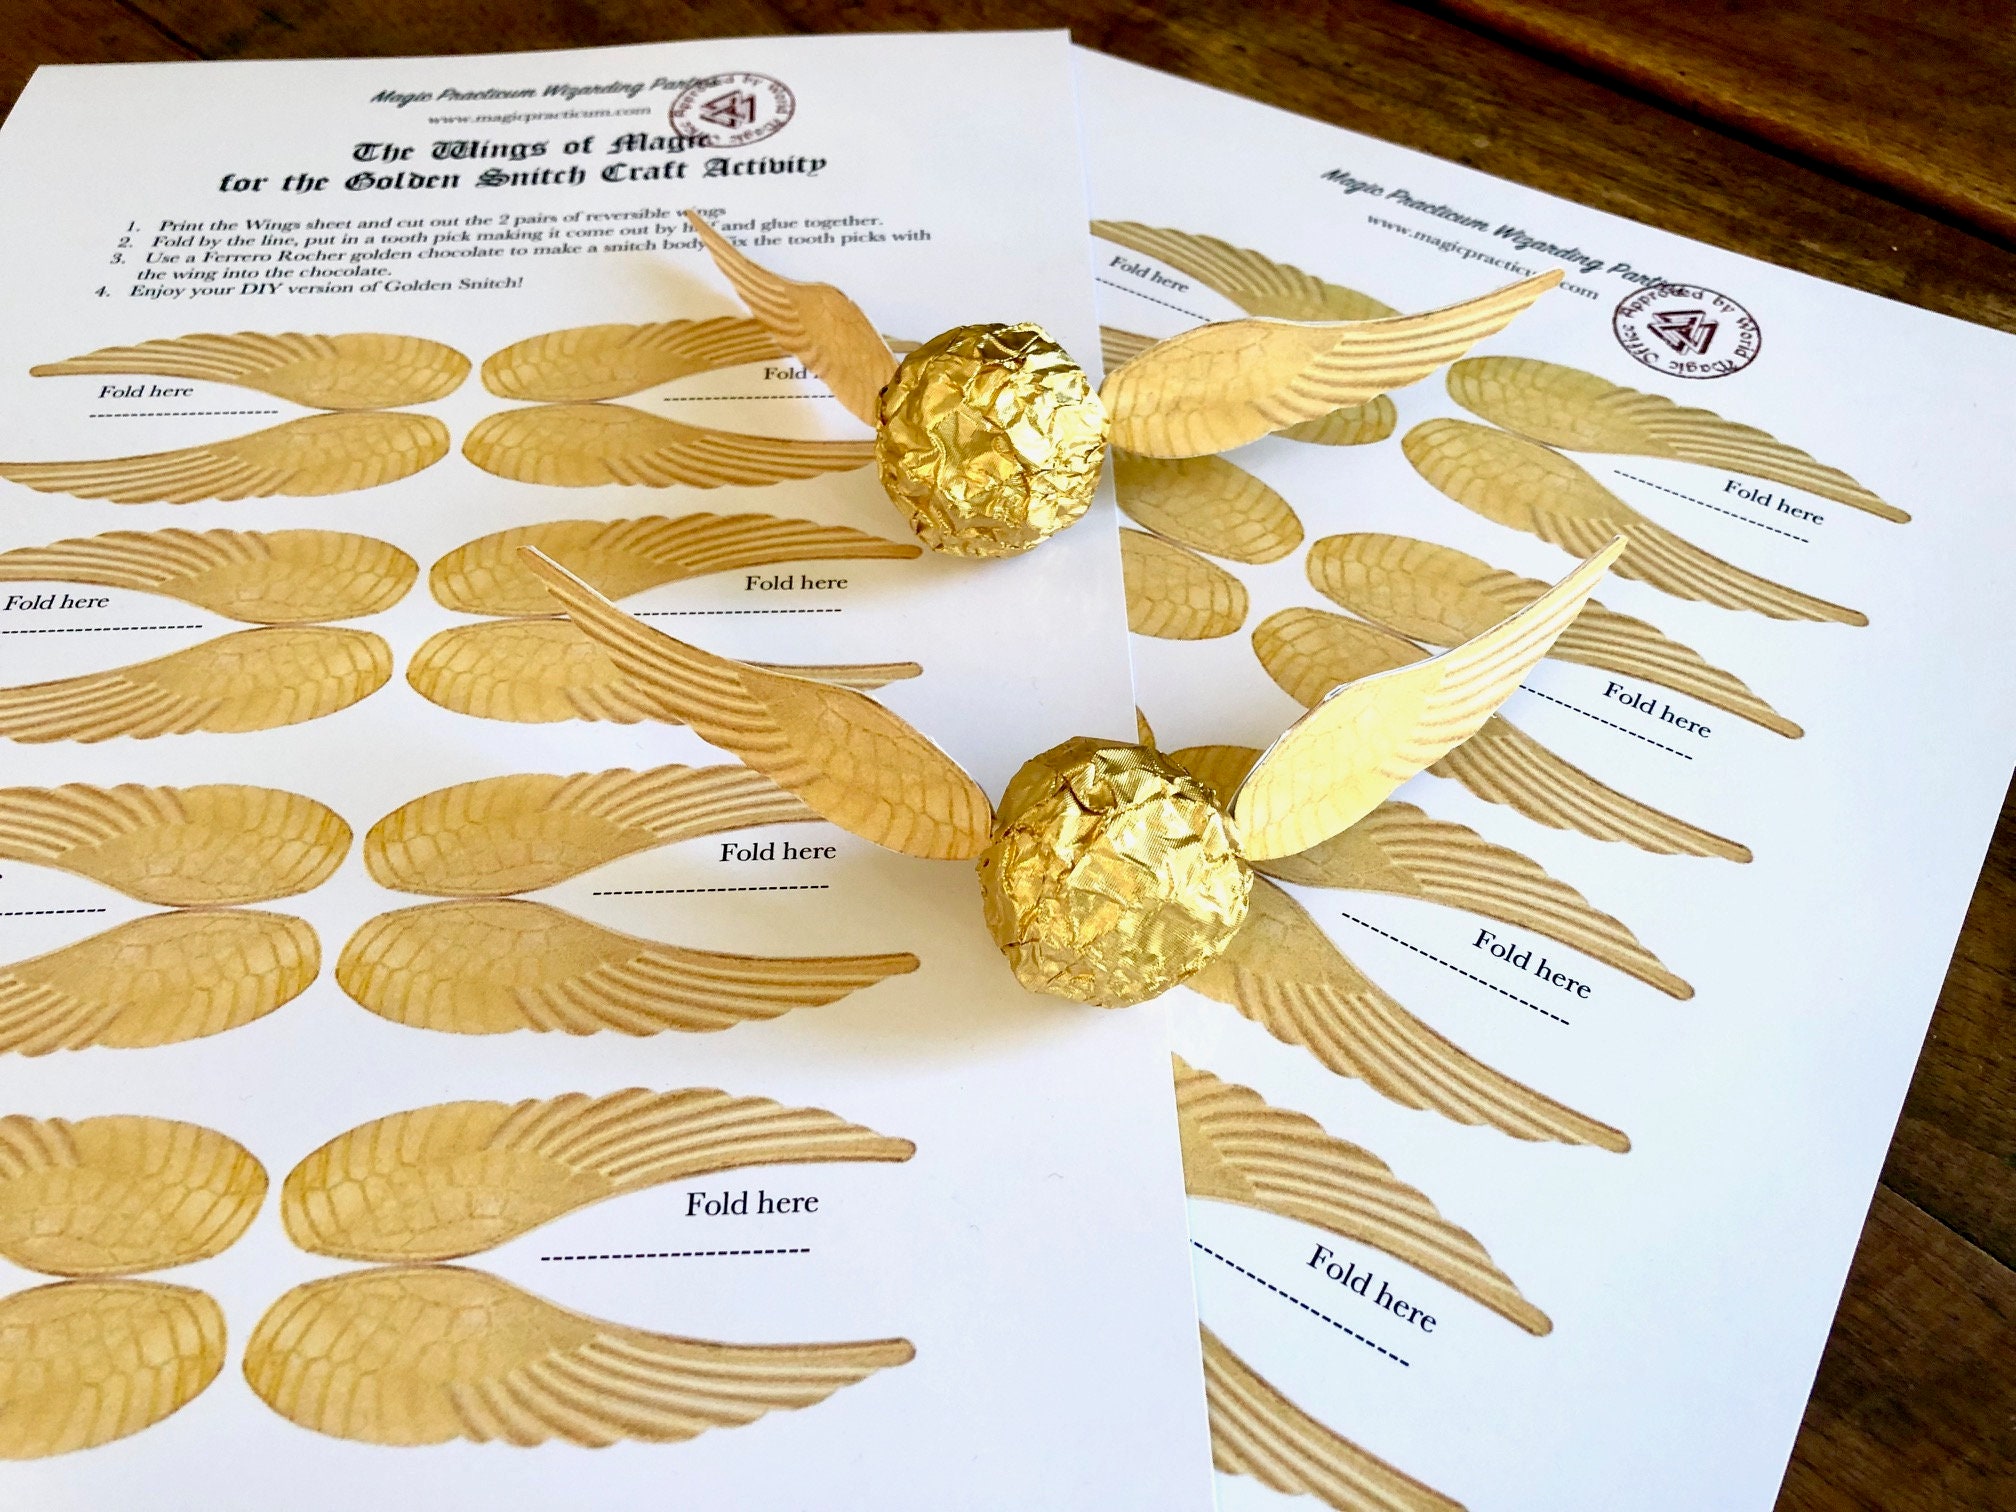 Golden Snitch Rocher Wings Cut File Template Png Svg Dxf Ai Files